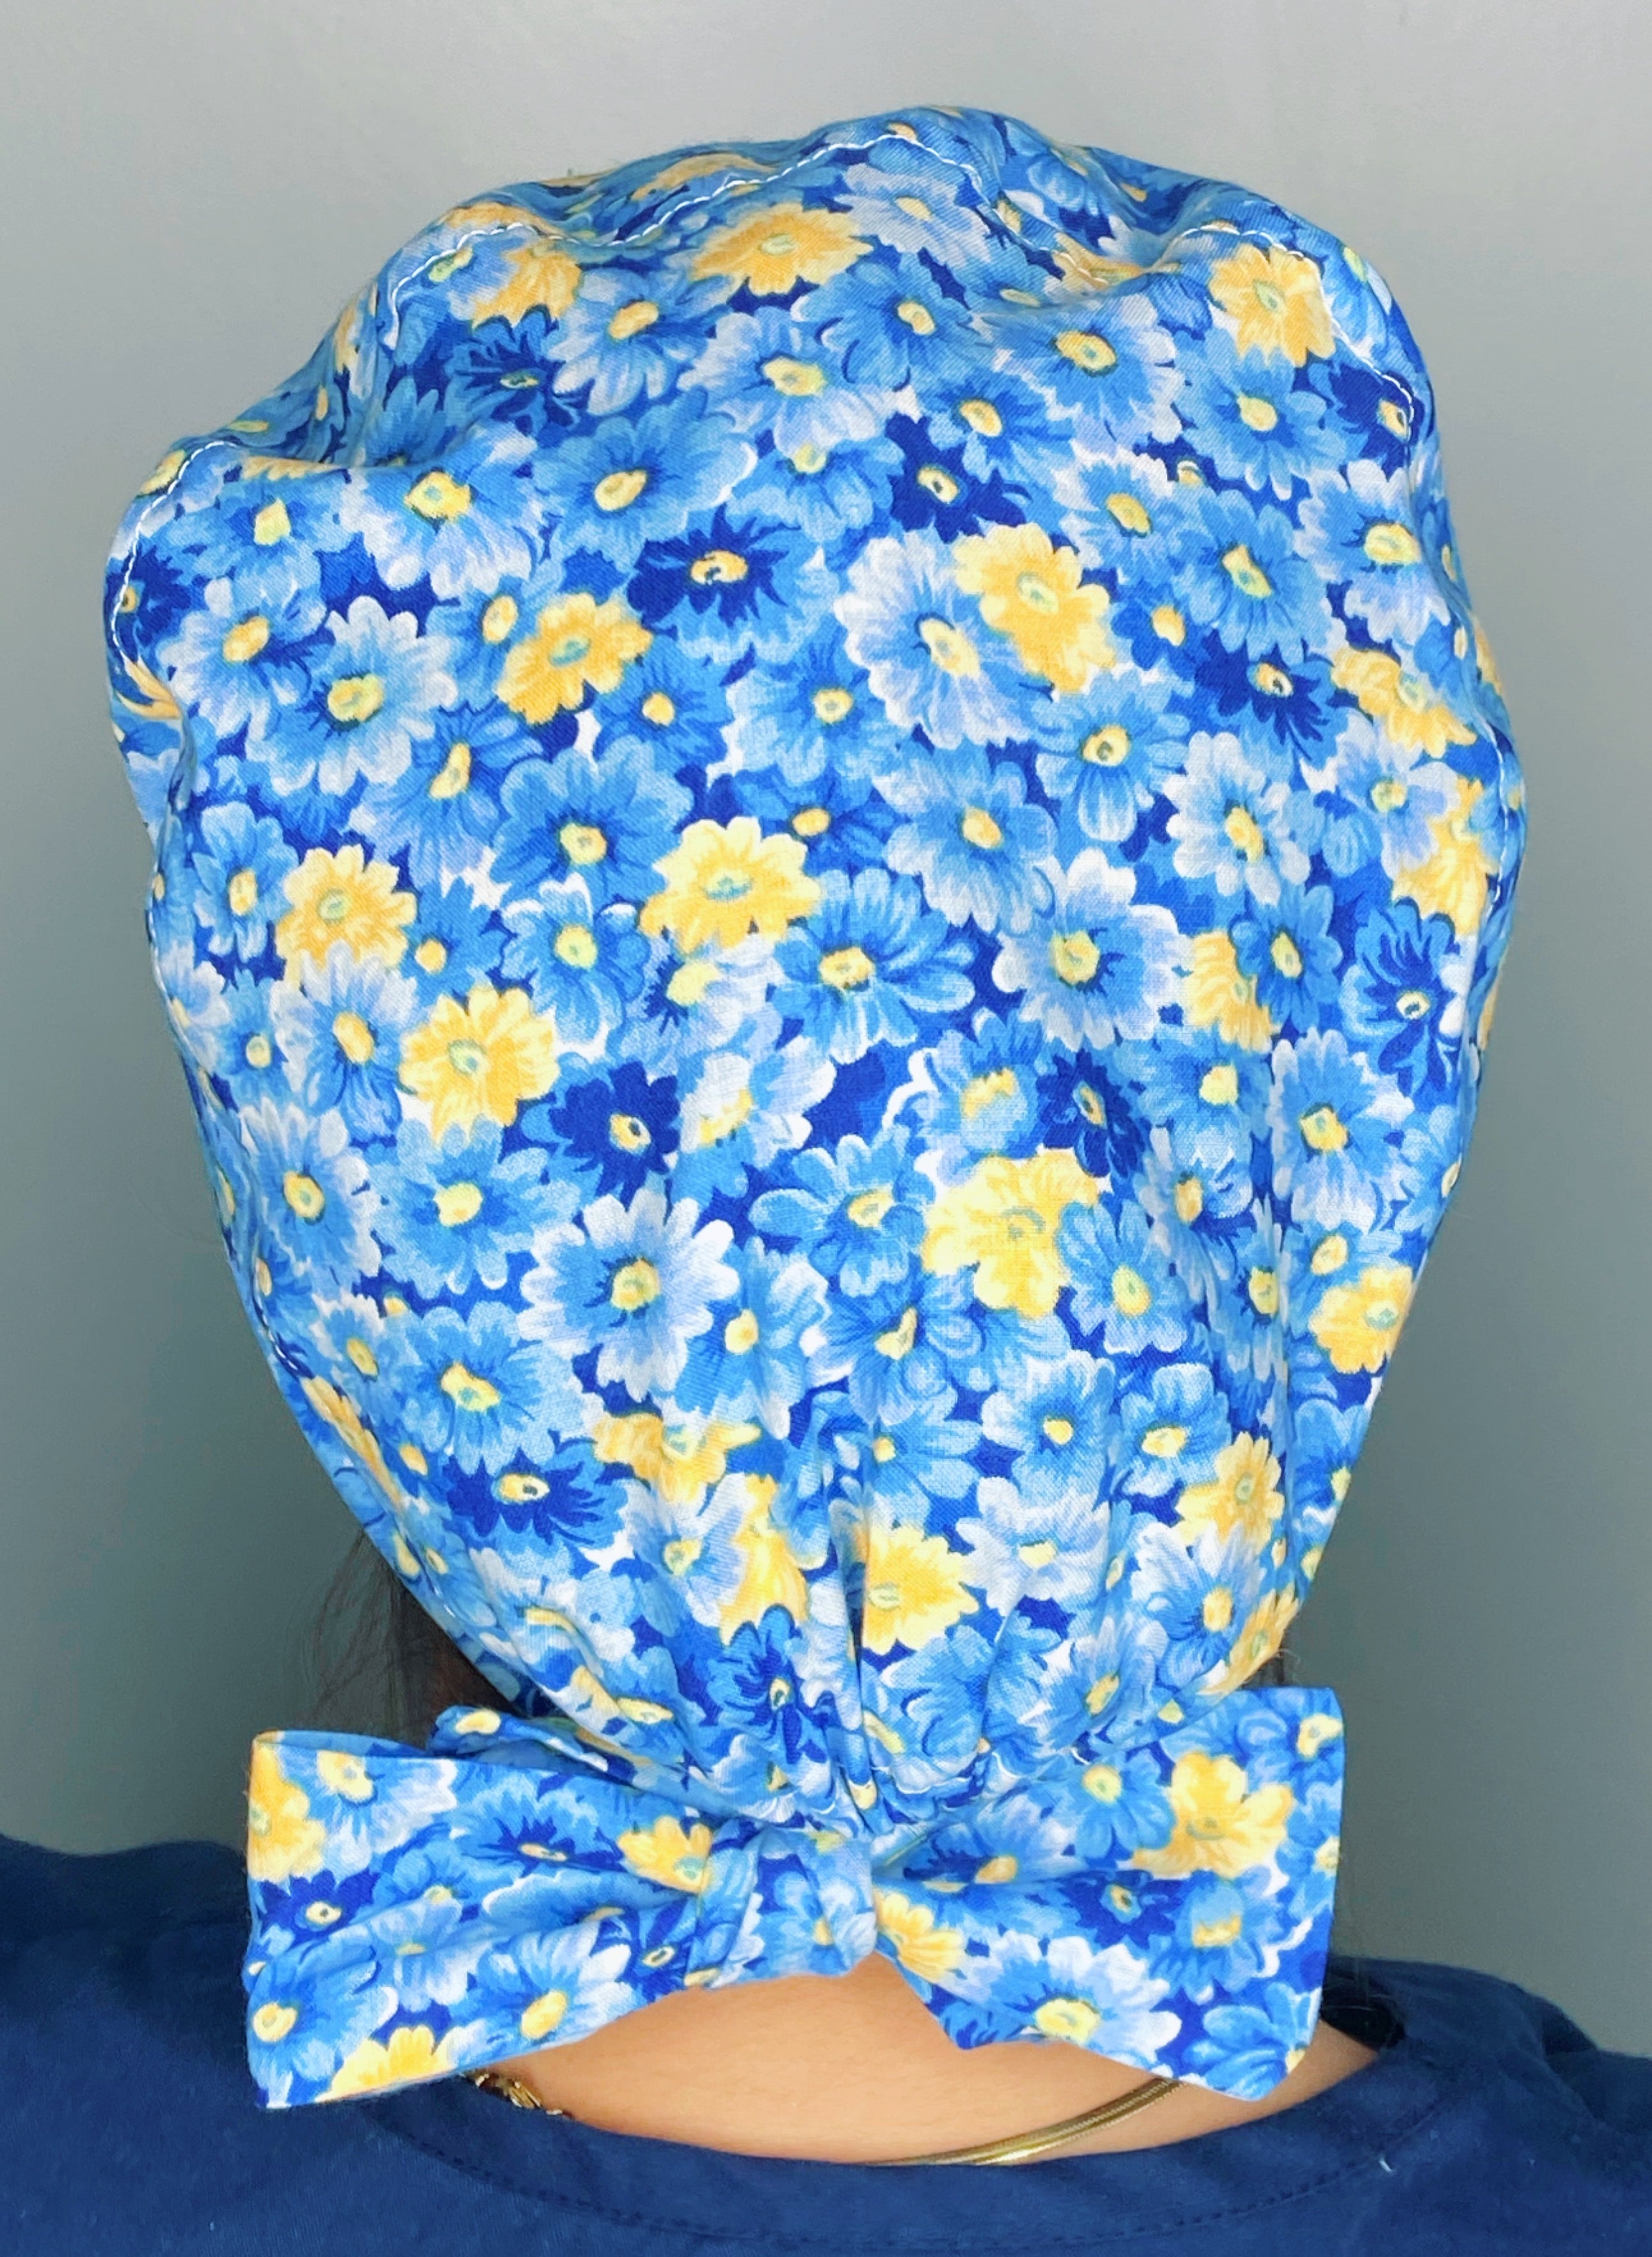 Blue & Yellow Daisies Flowers Floral Themed Pixie